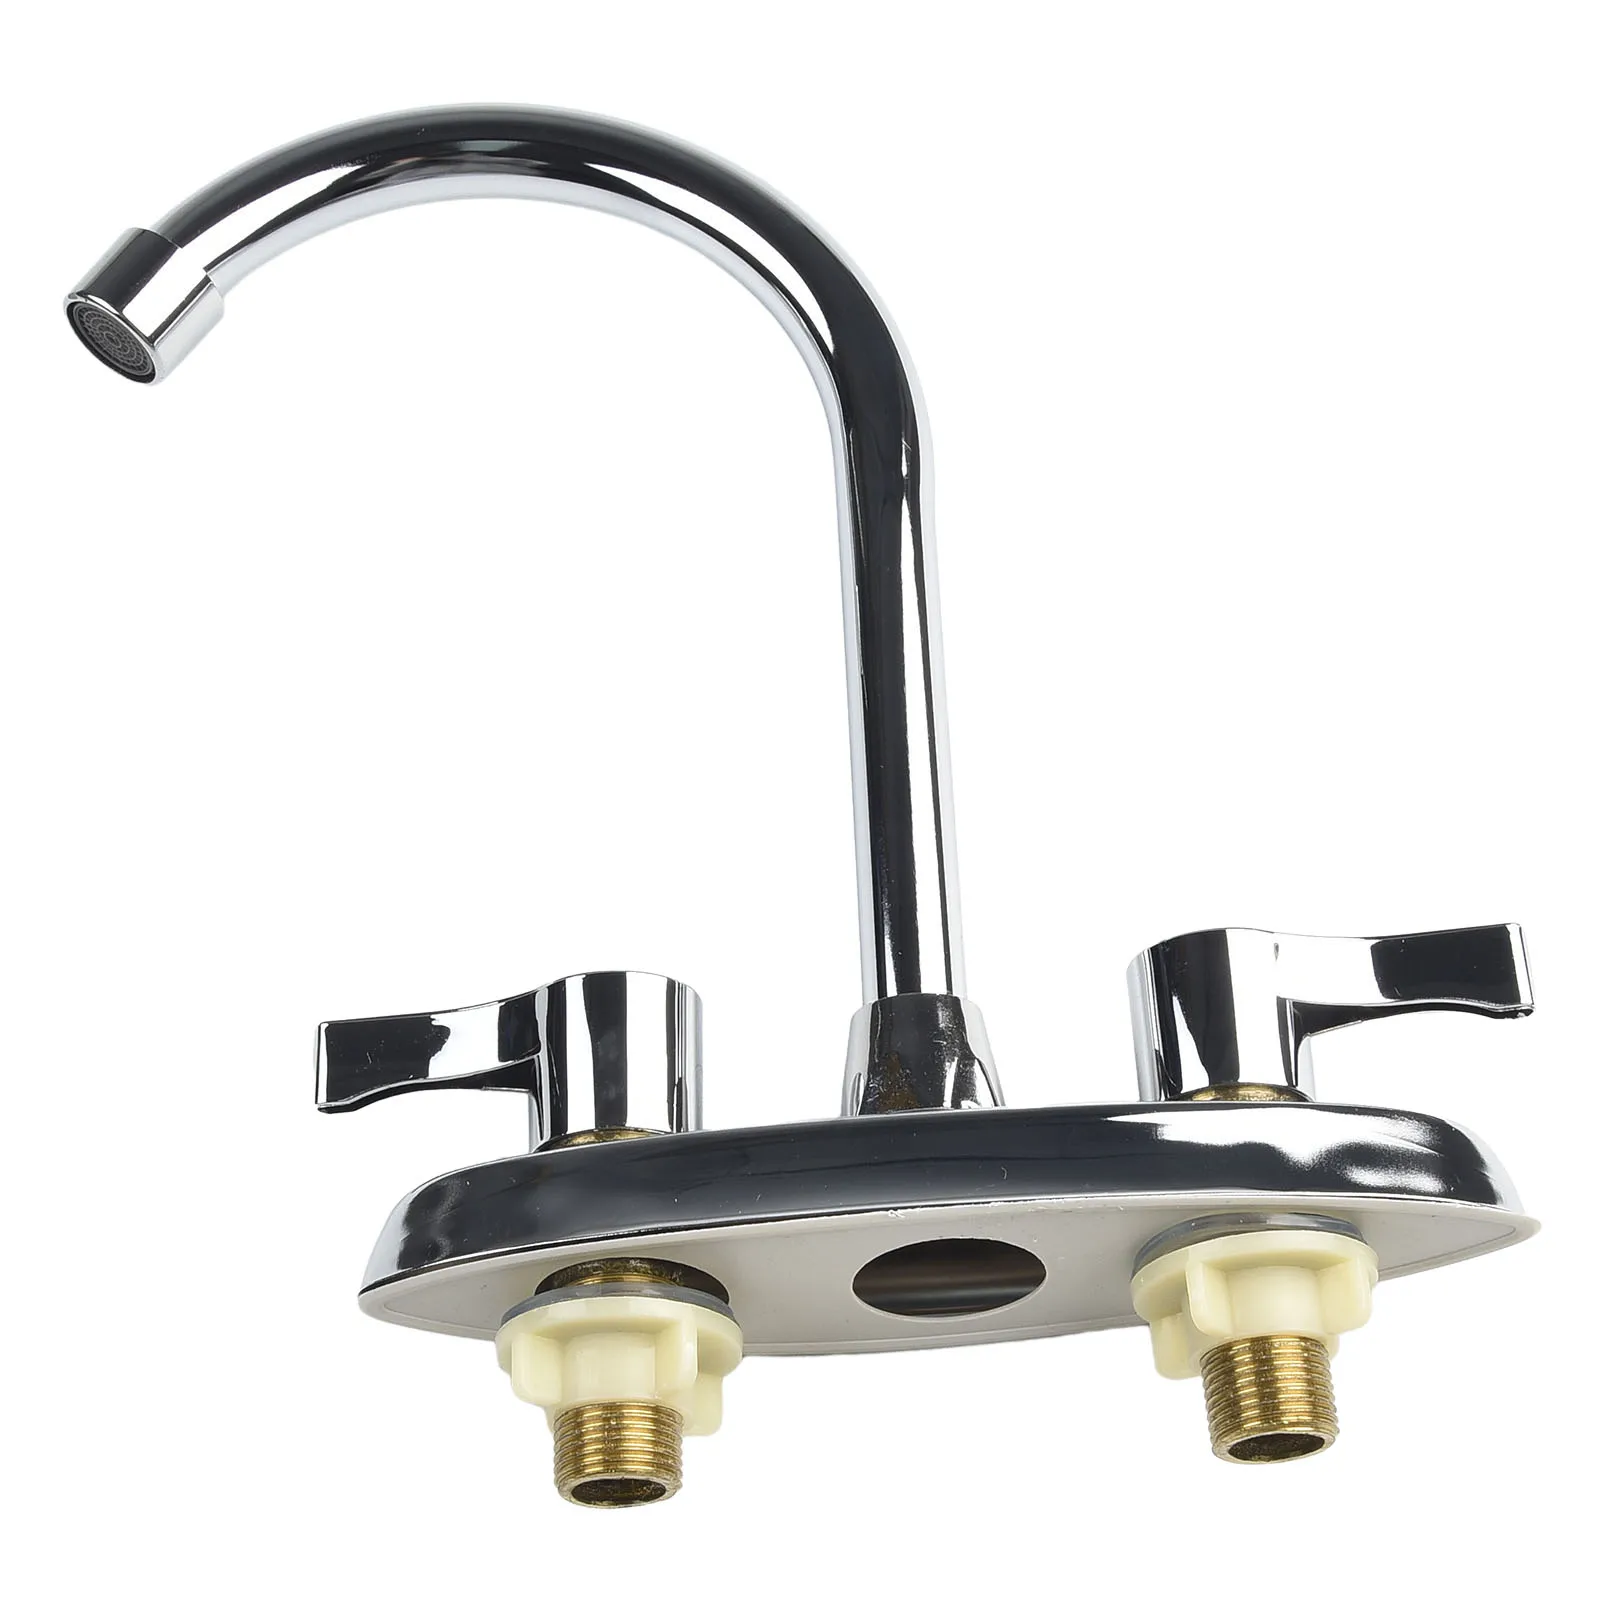 

Basin Faucet Kitchen Faucet Double Hole Handle Hot And Cold Basin Sink 0-=Mixer Tap Basin /*Sink Water Taps Bathroom Accessories